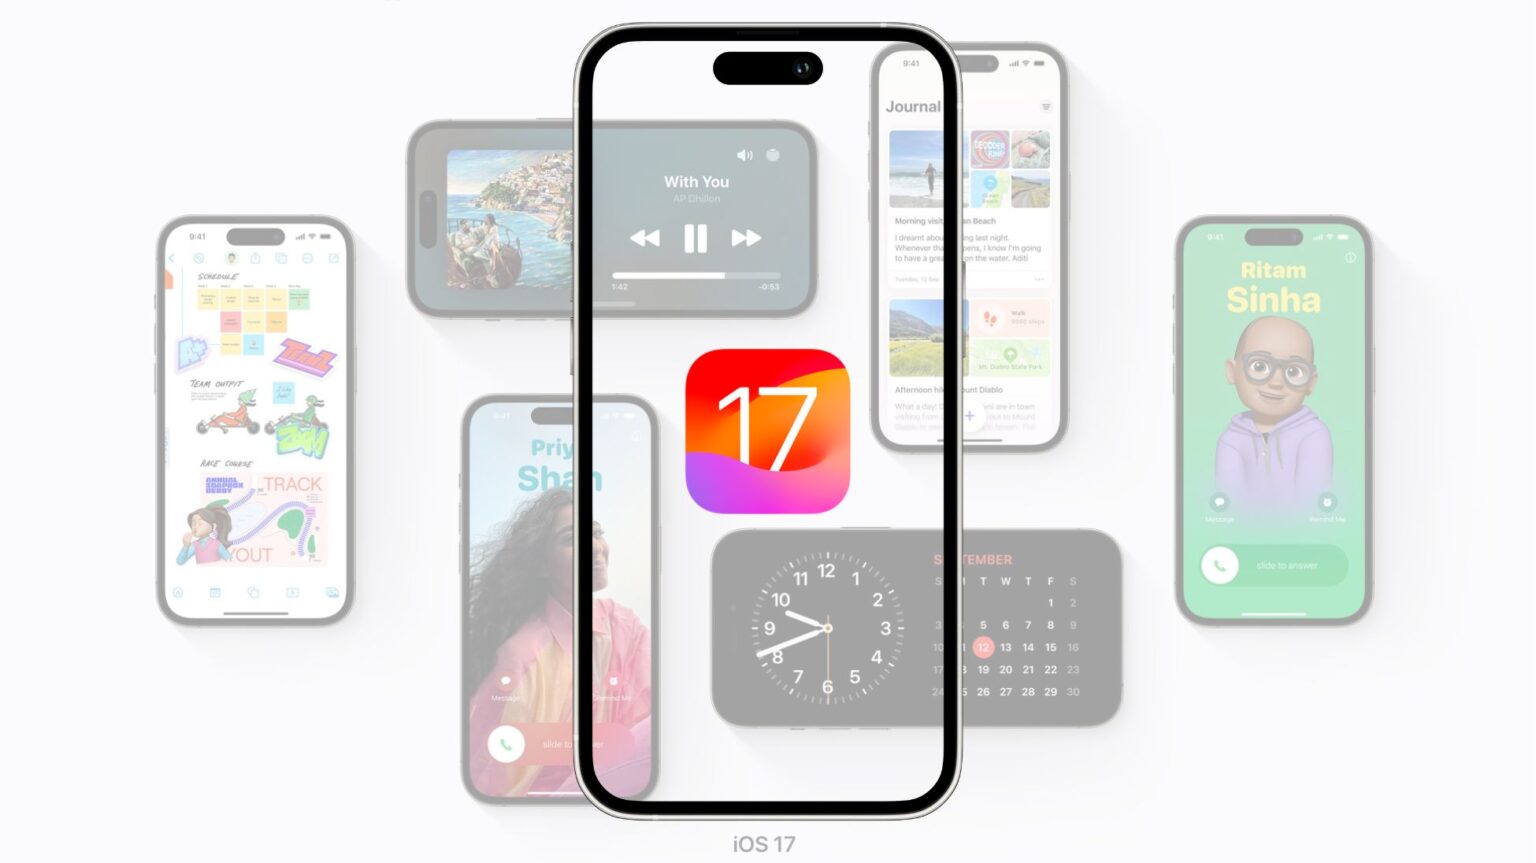 iOS 17 is finally here!